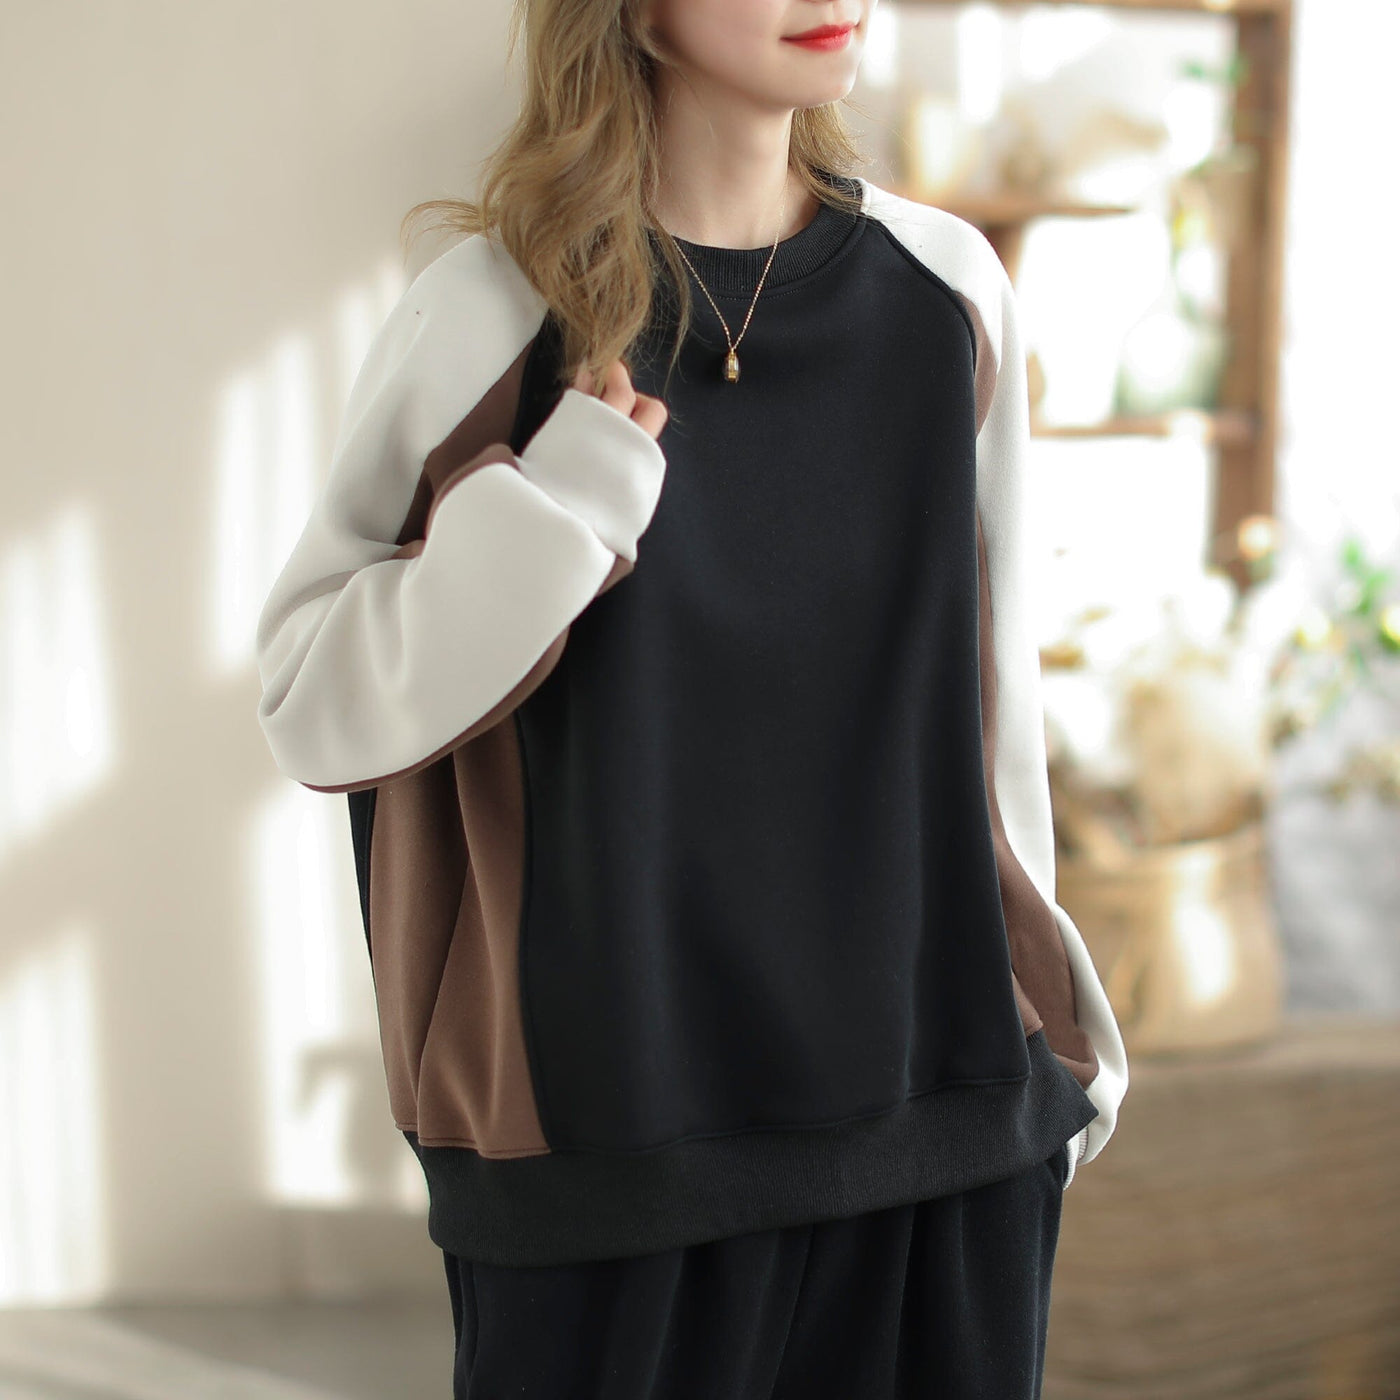 Autumn Winter Color Matching Fashion Casual Sweater Dec 2023 New Arrival One Size Black 